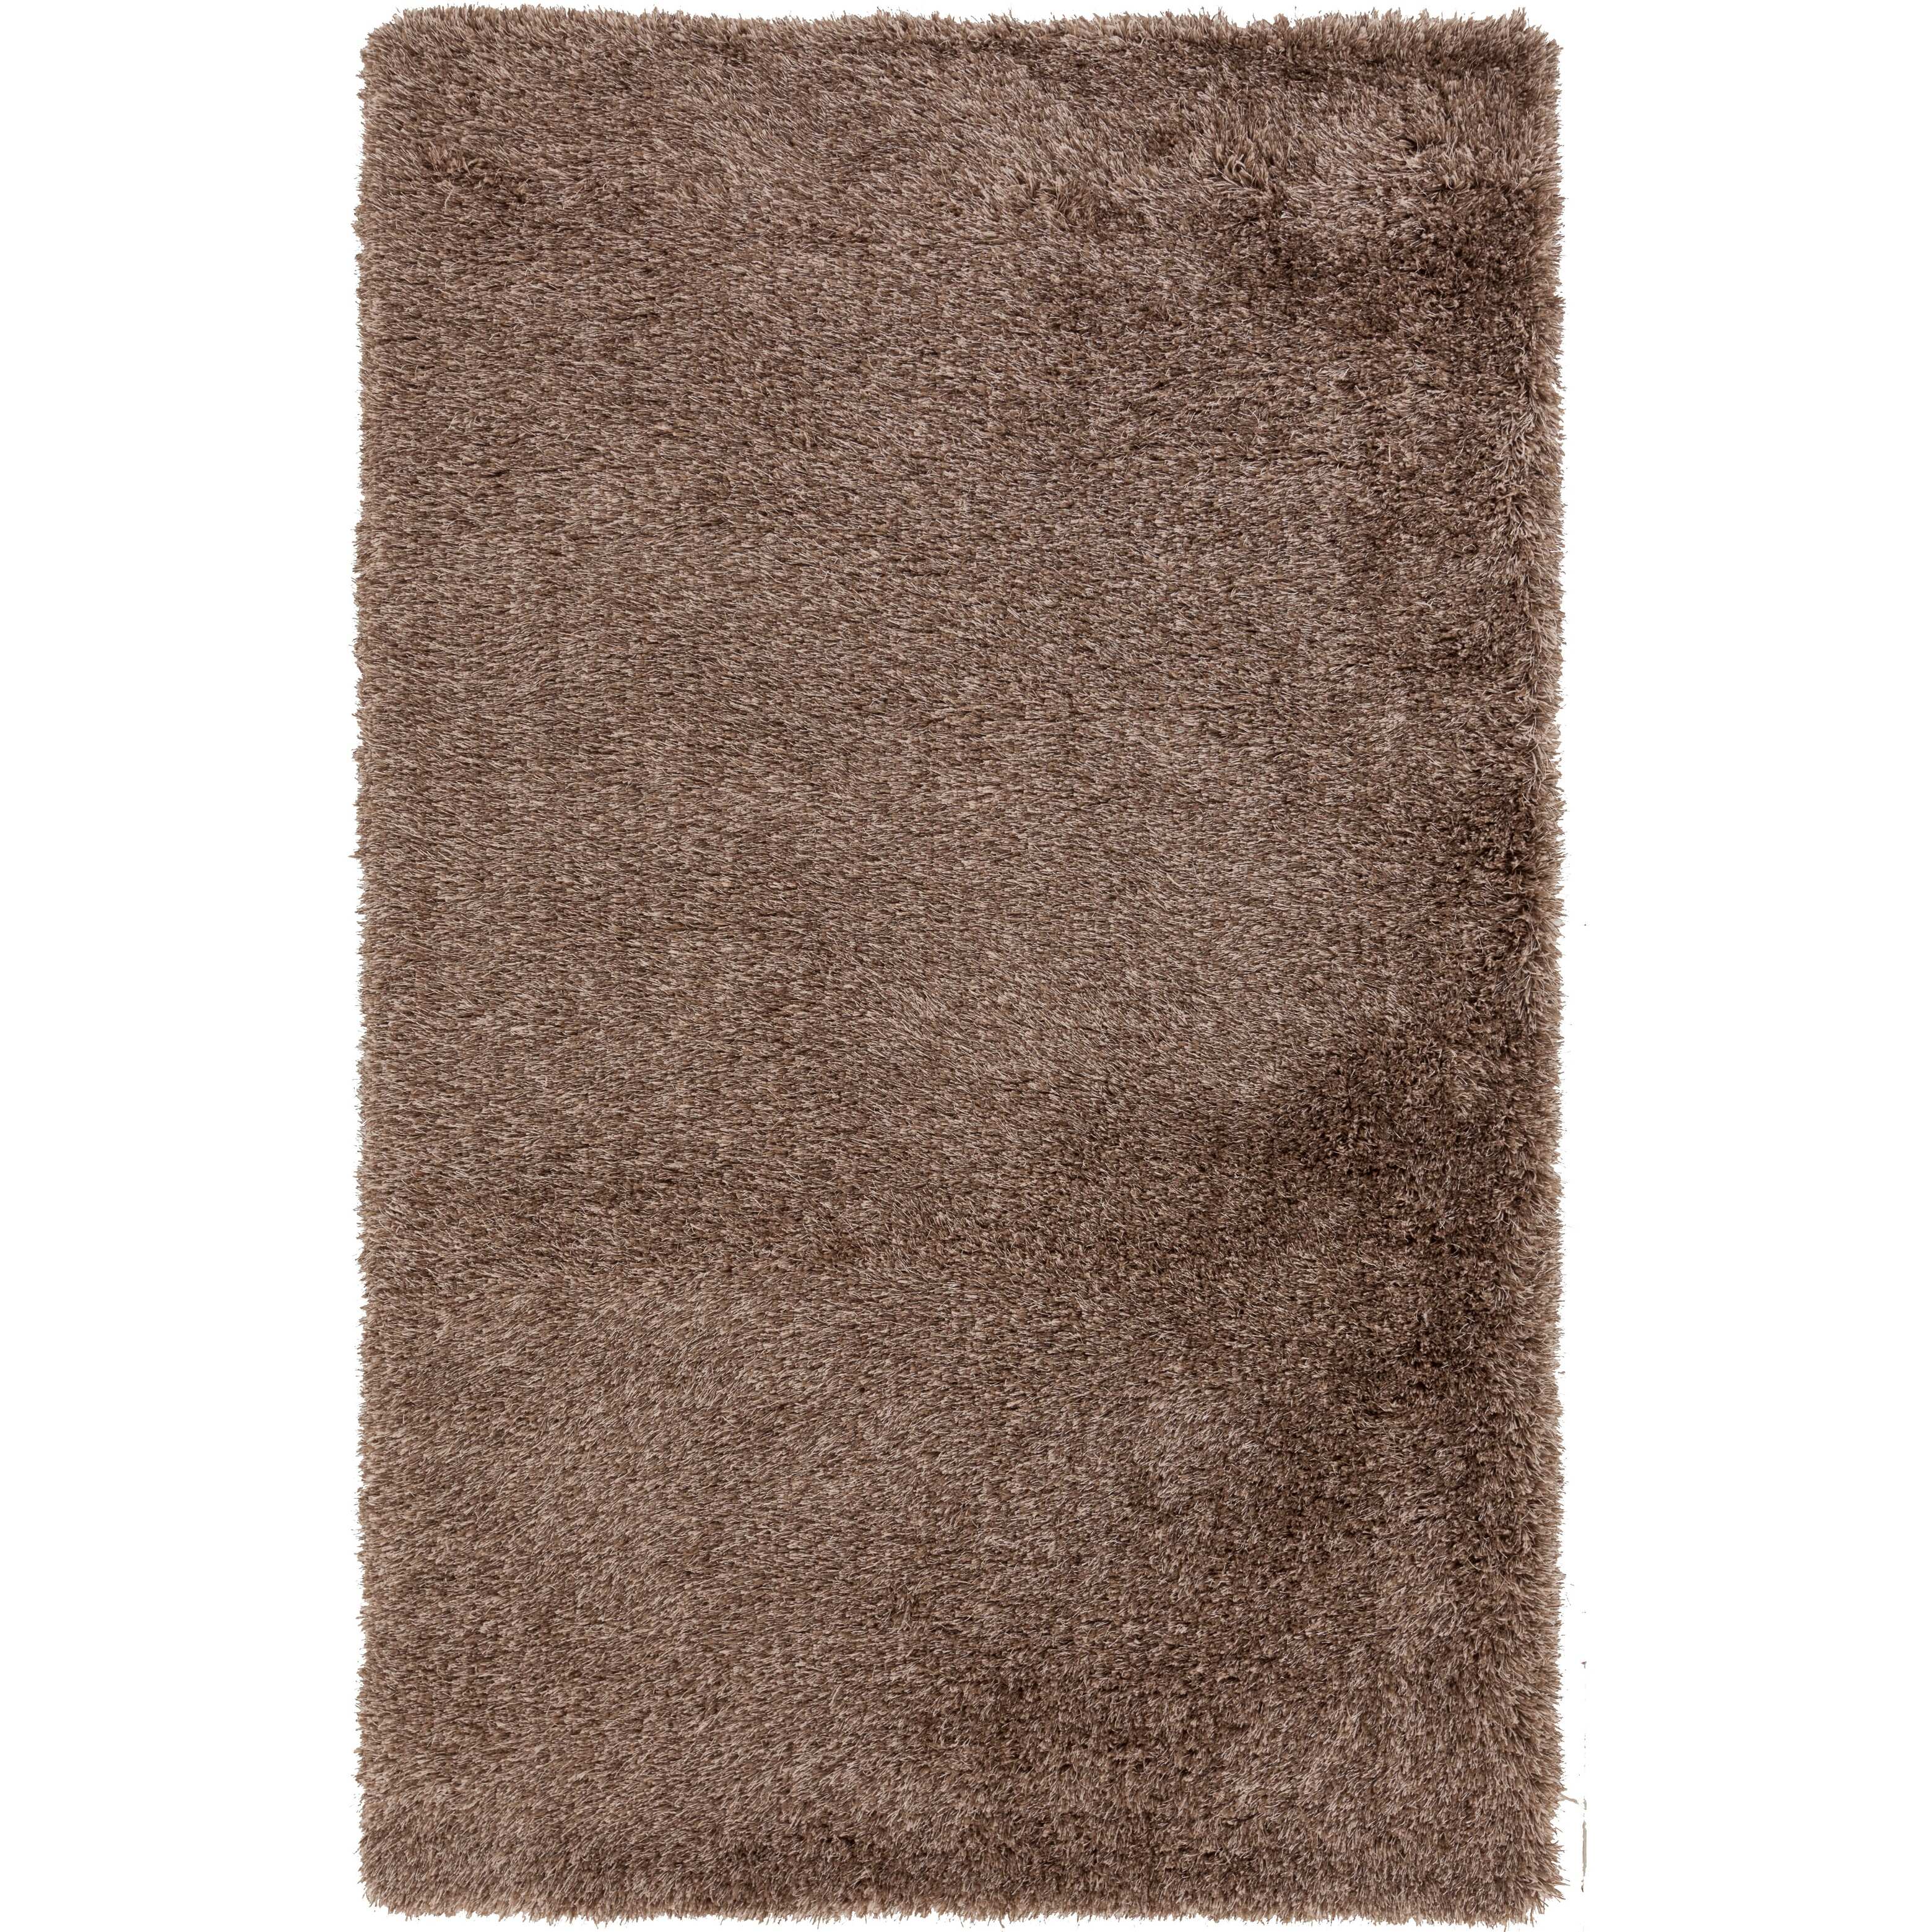 Hand-Woven Melanie Solid Pattern Area Rug